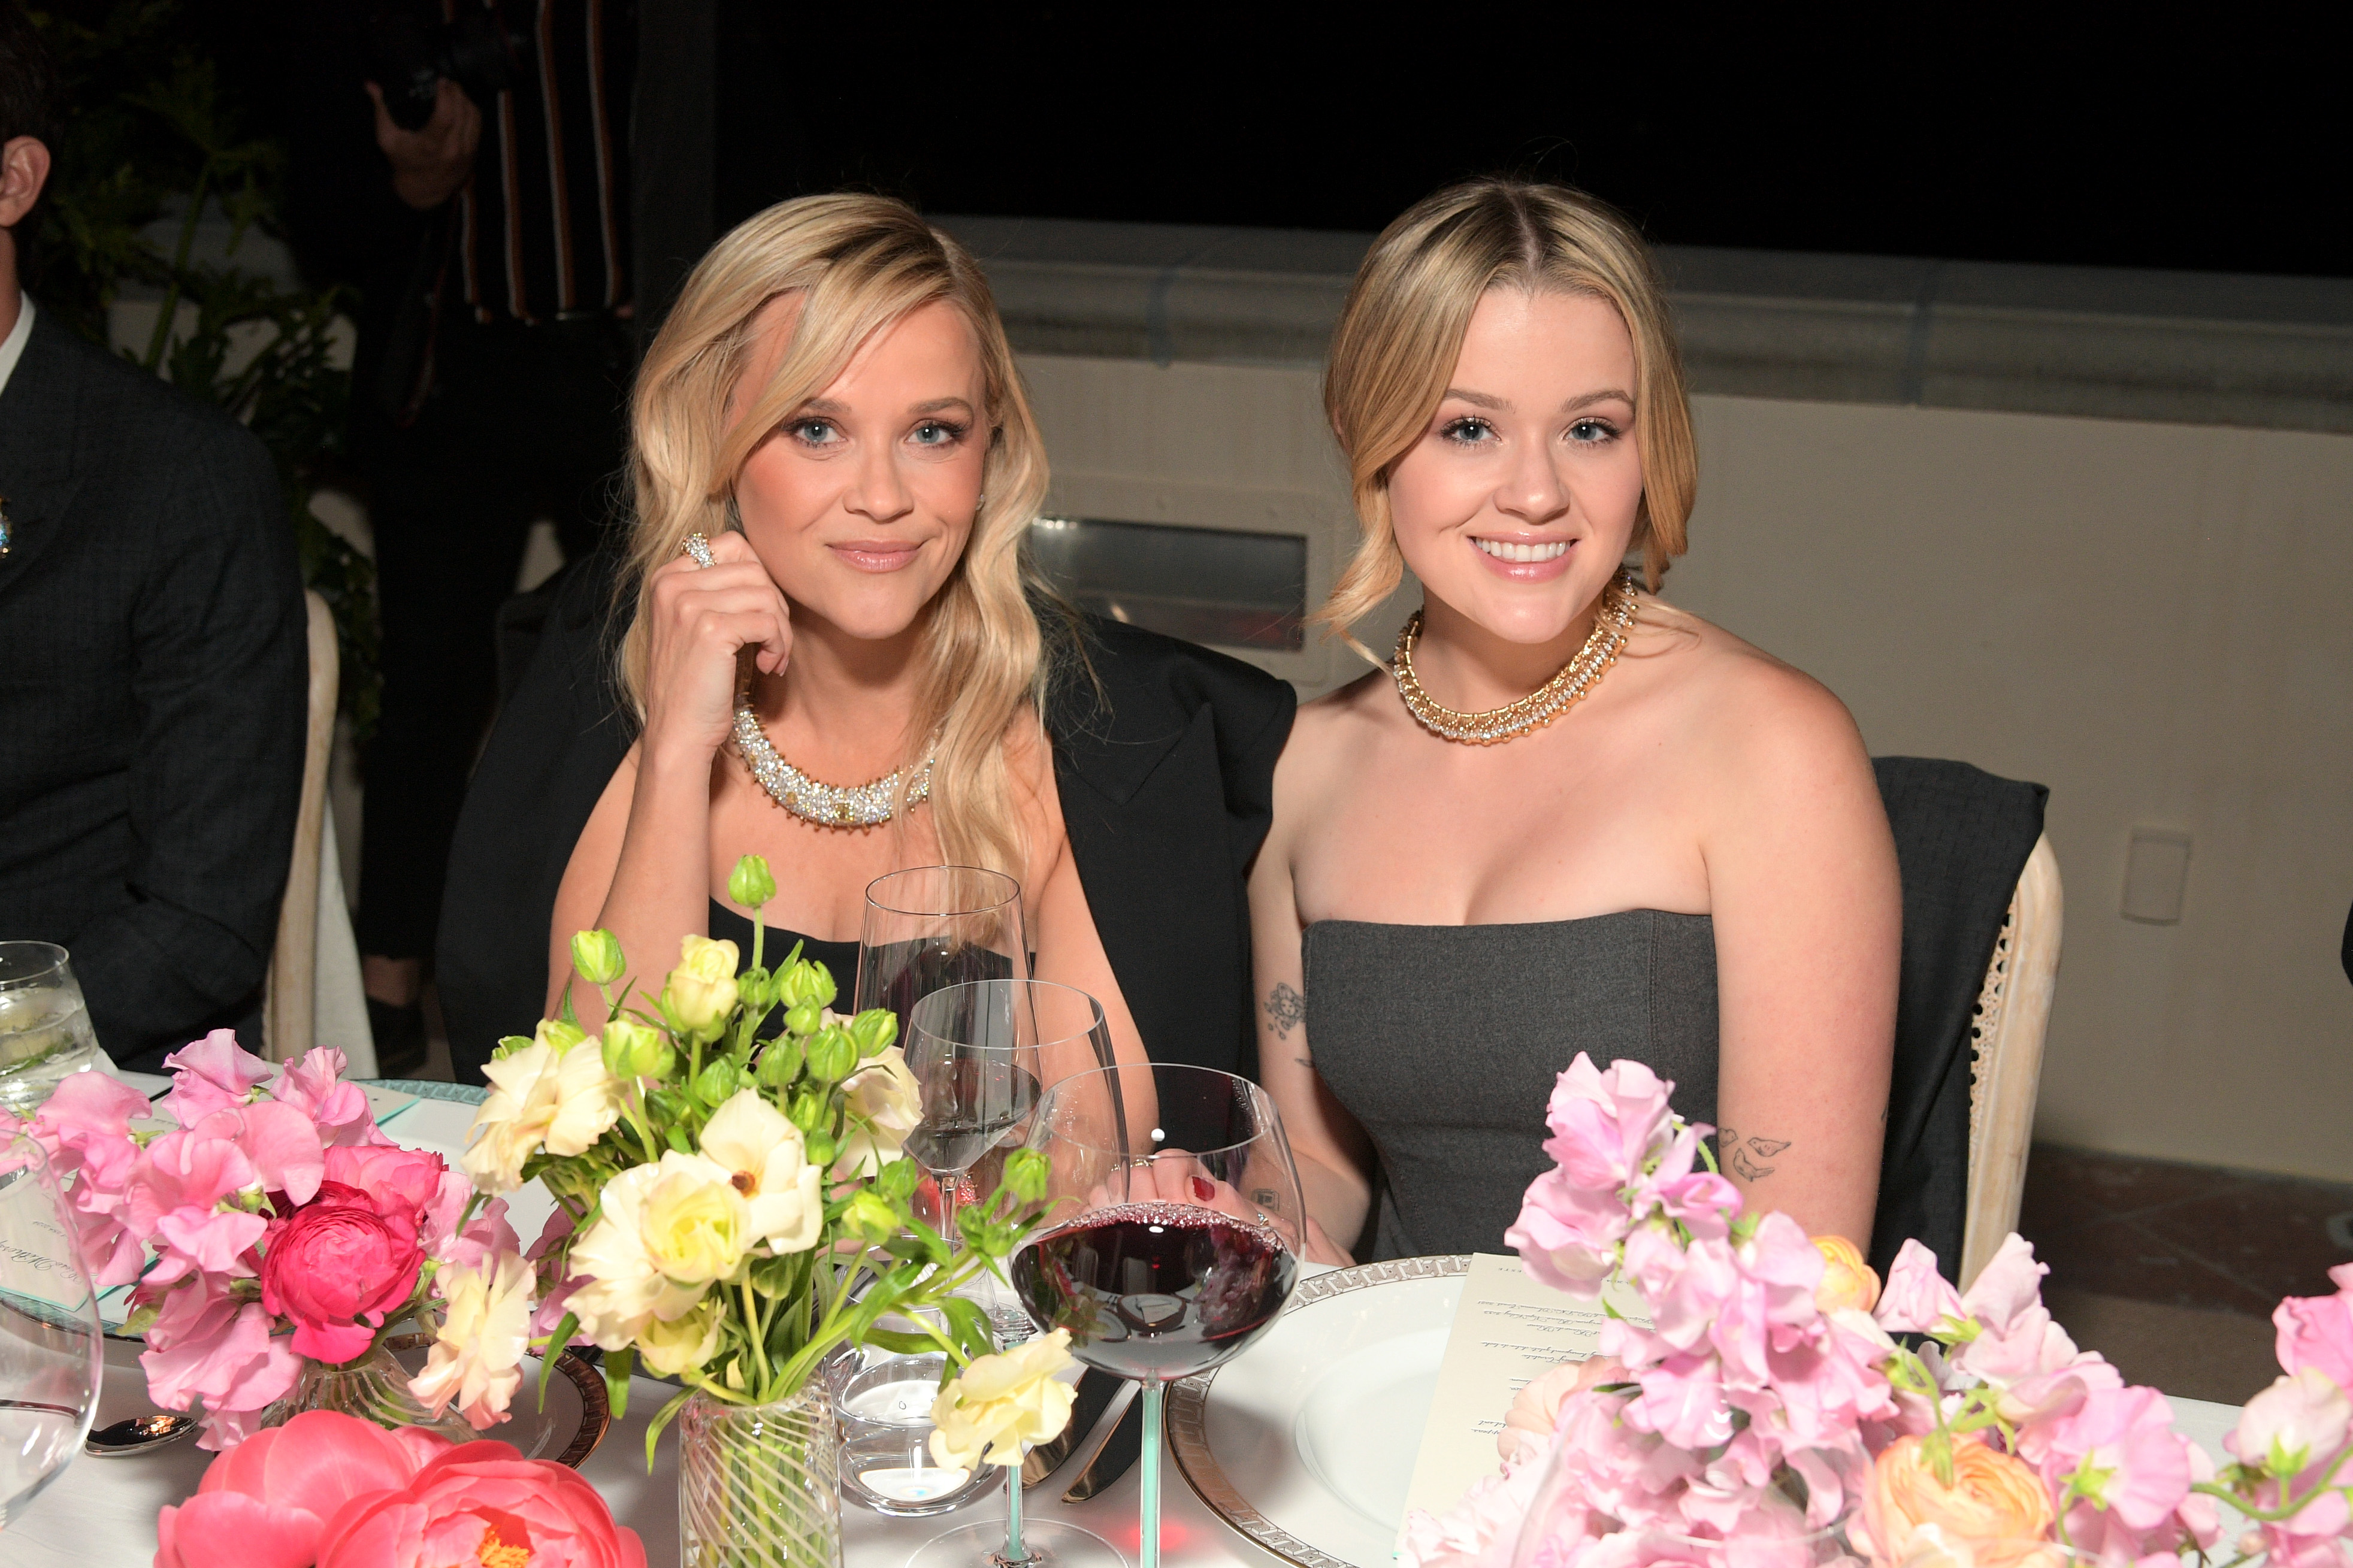 Reese Witherspoon's daughter Ava Phillippe slams ‘toxic' body
shaming comments